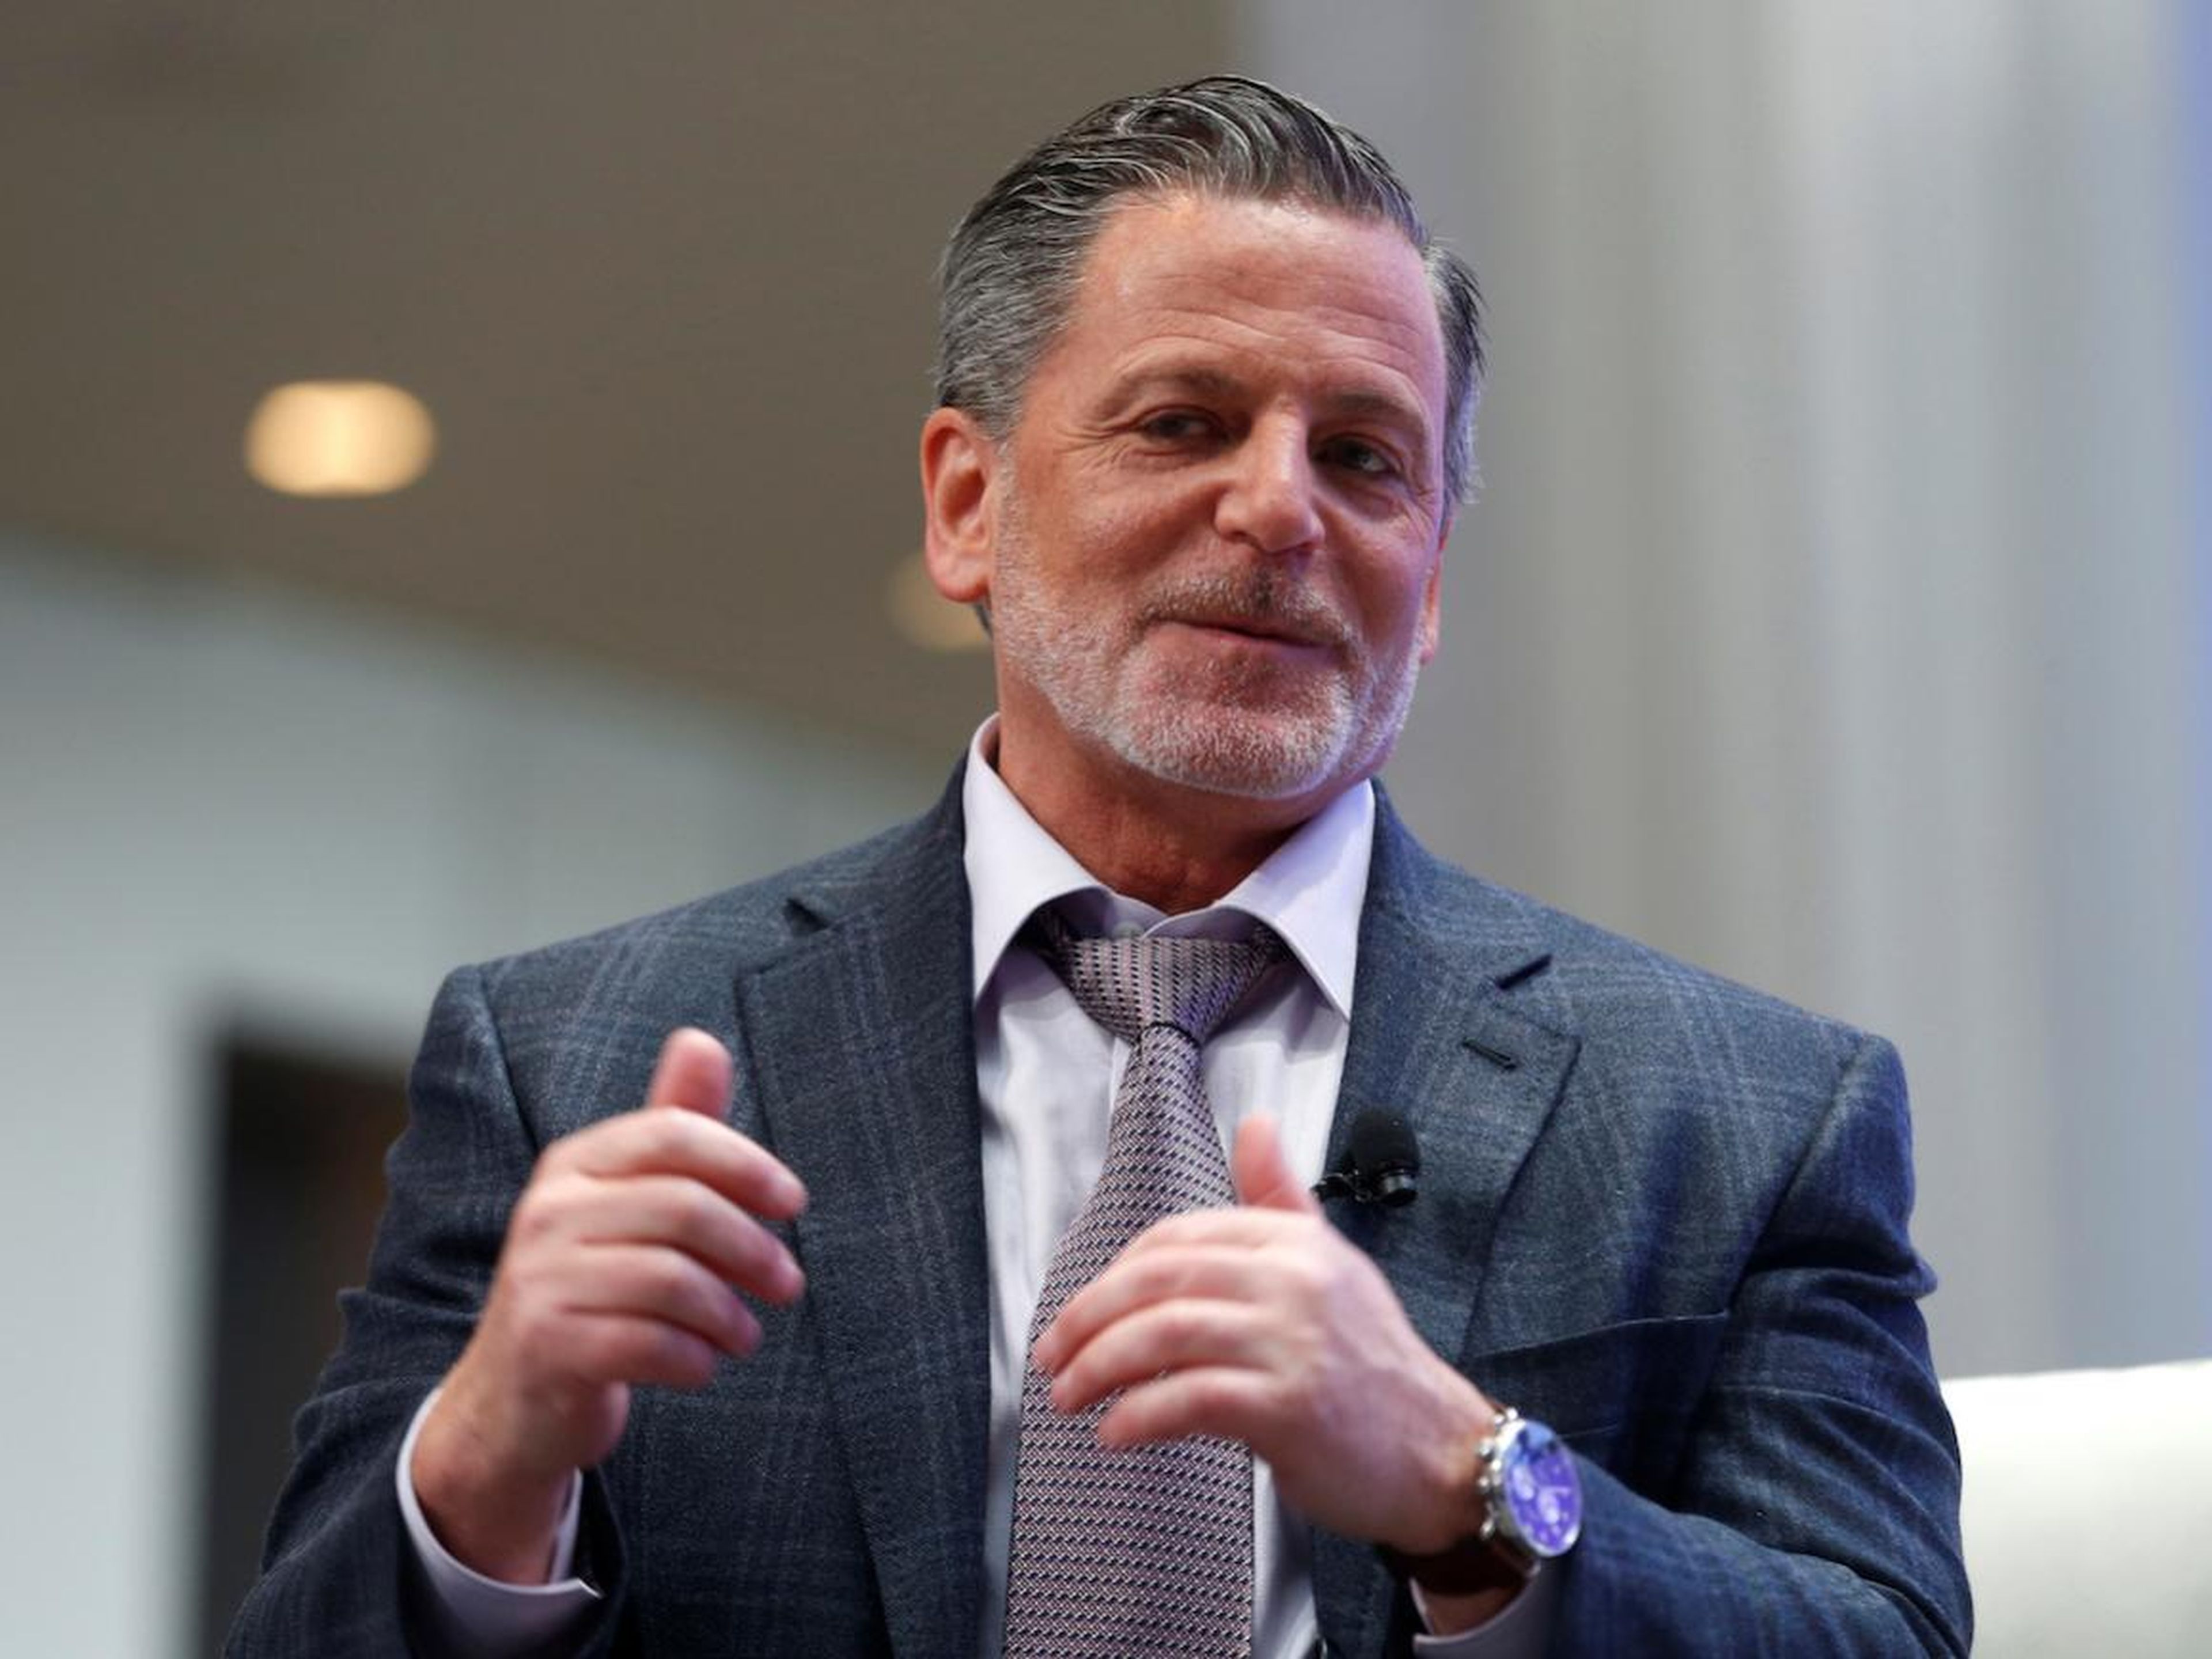 Quicken Loans founder and Cleveland Cavaliers owner Dan Gilbert.